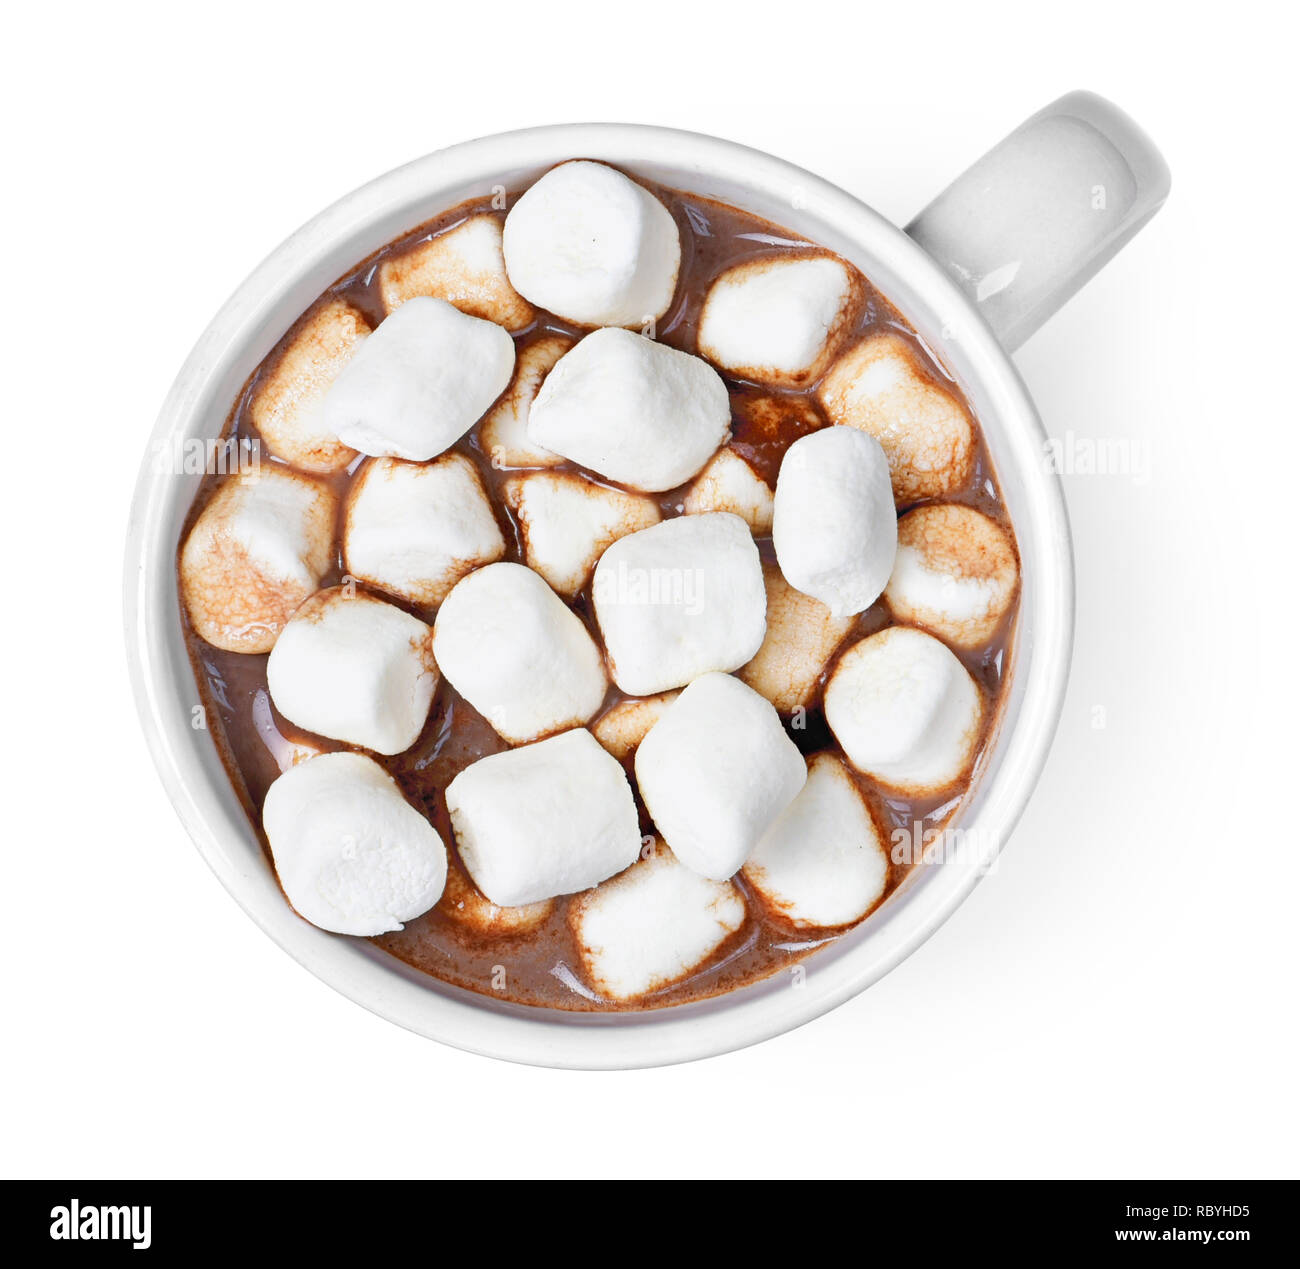 Hot chocolate or cocoa drink in a cup or mug. Top view of hot chocolate with marshmallows, isolated on white background. Stock Photo